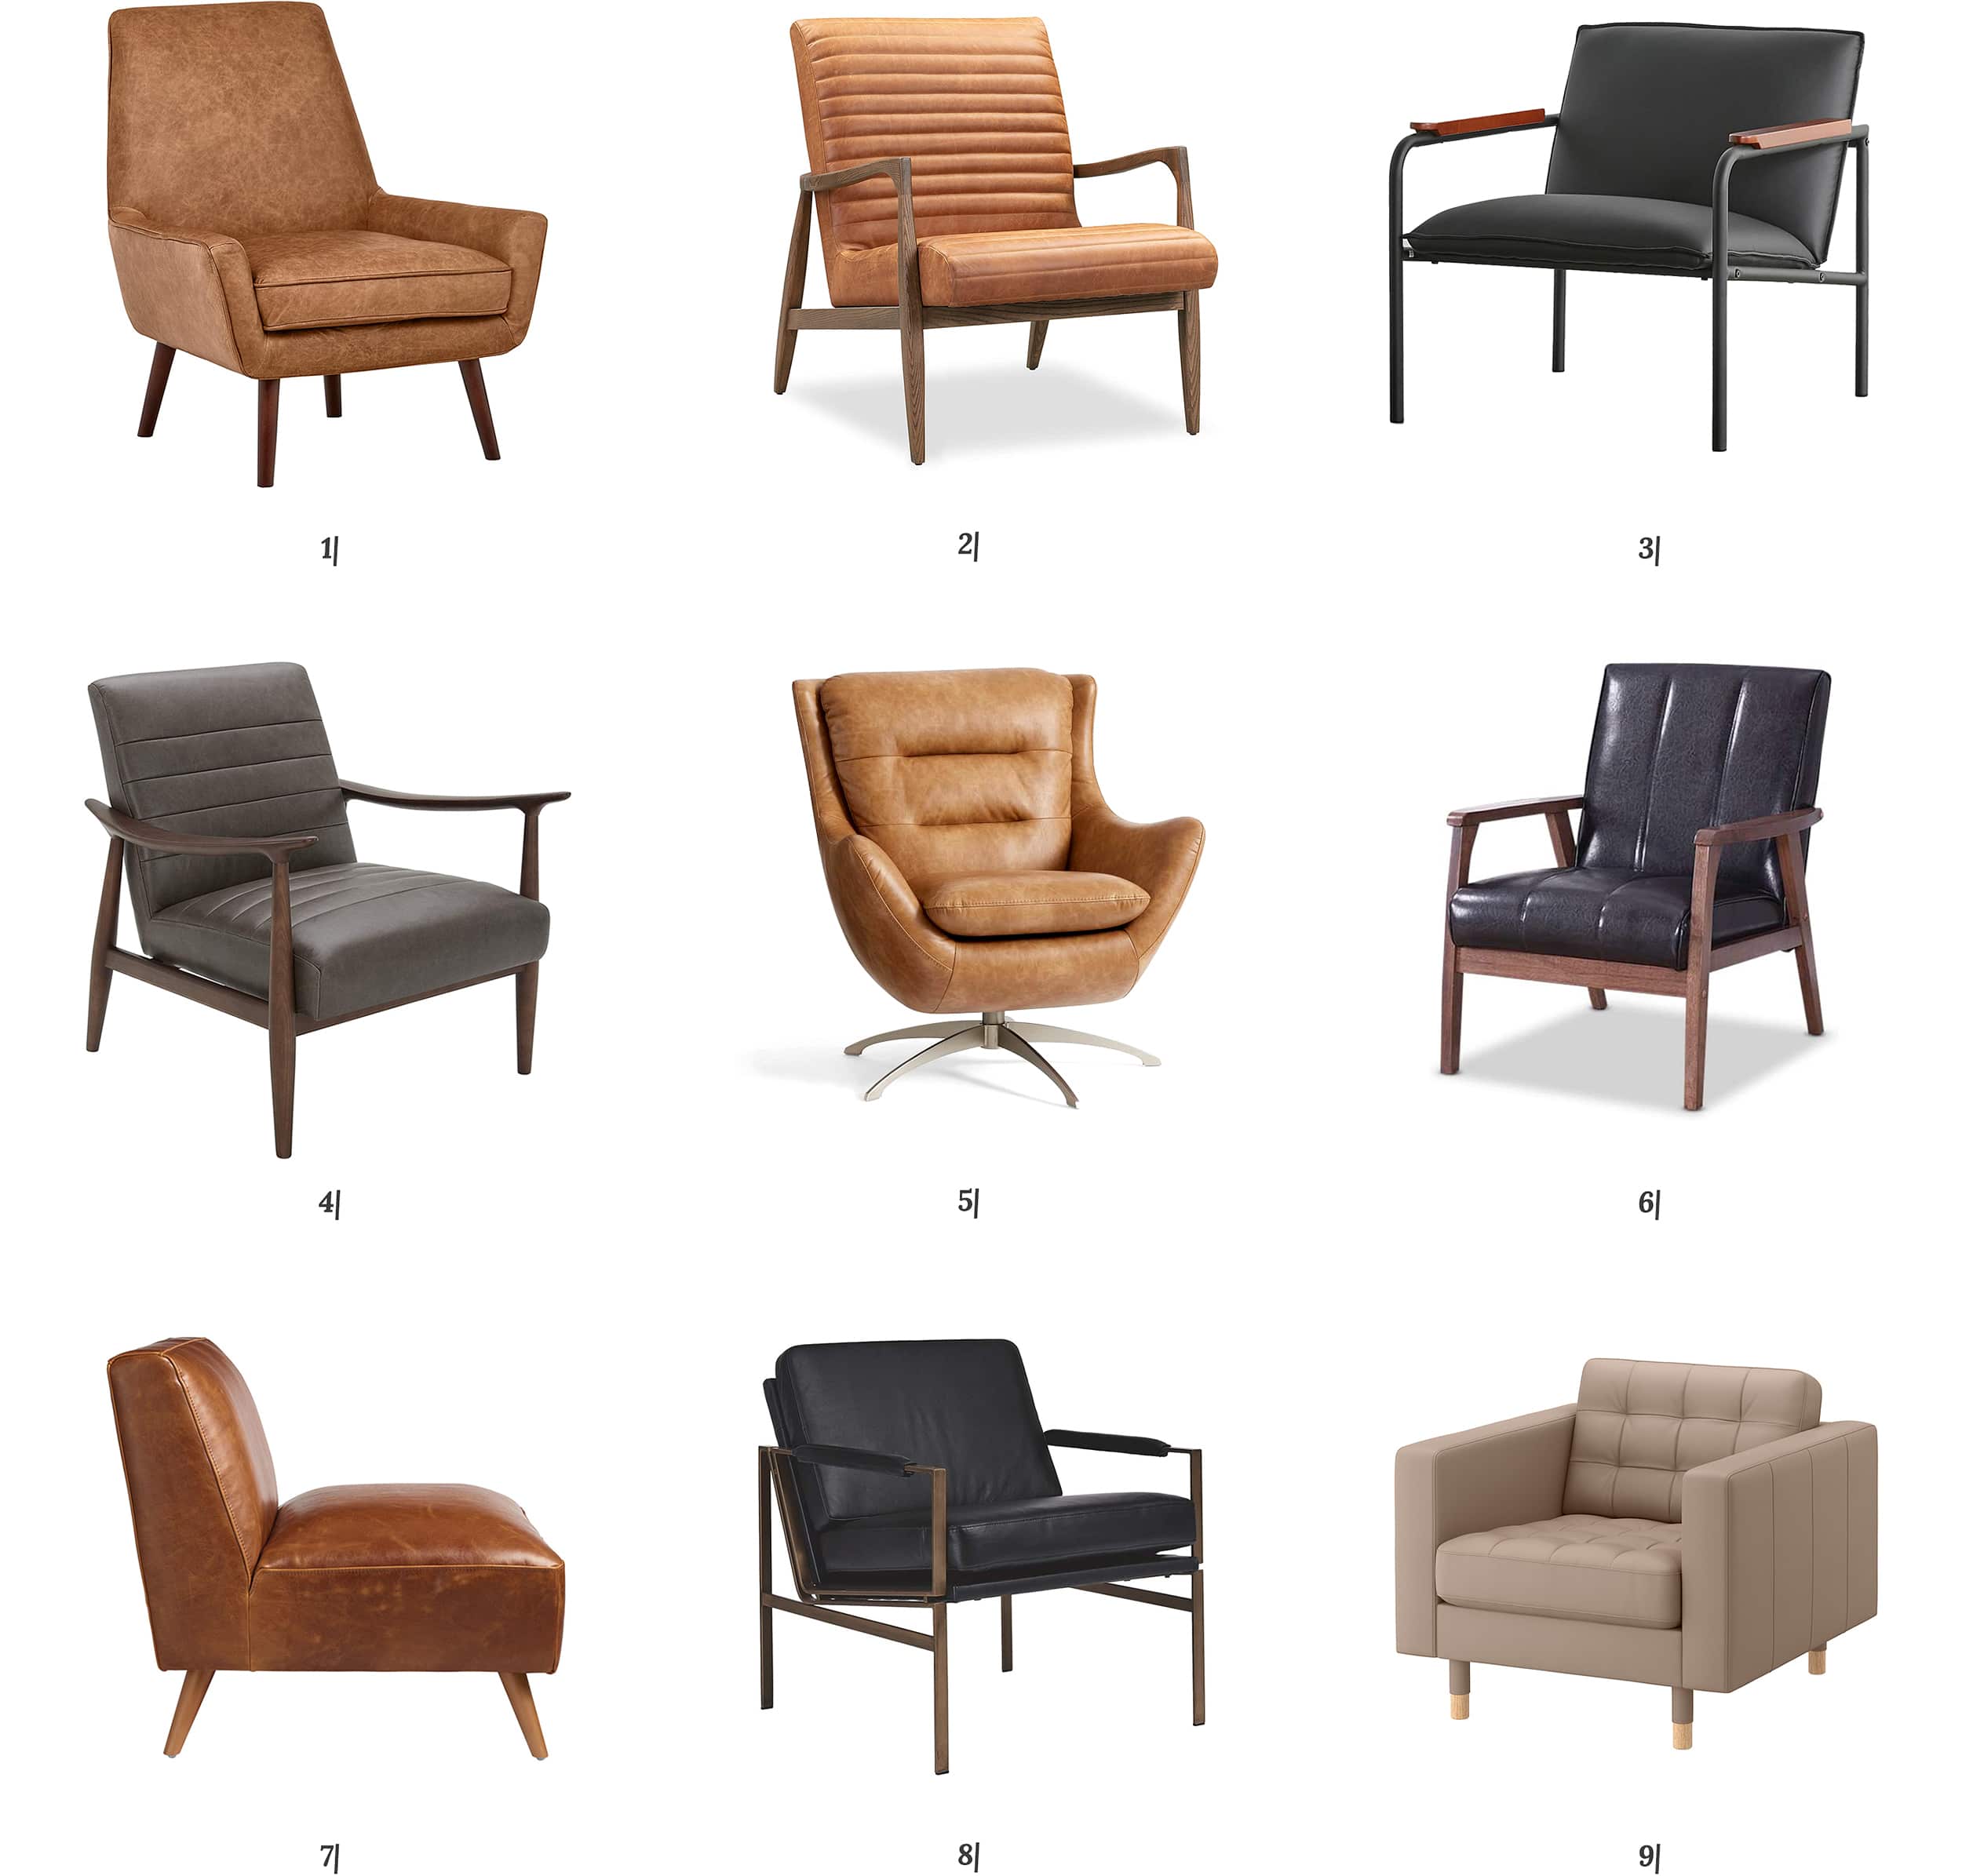 A roundup of 9 leather chairs priced less than $750 // via Yellow Brick Home